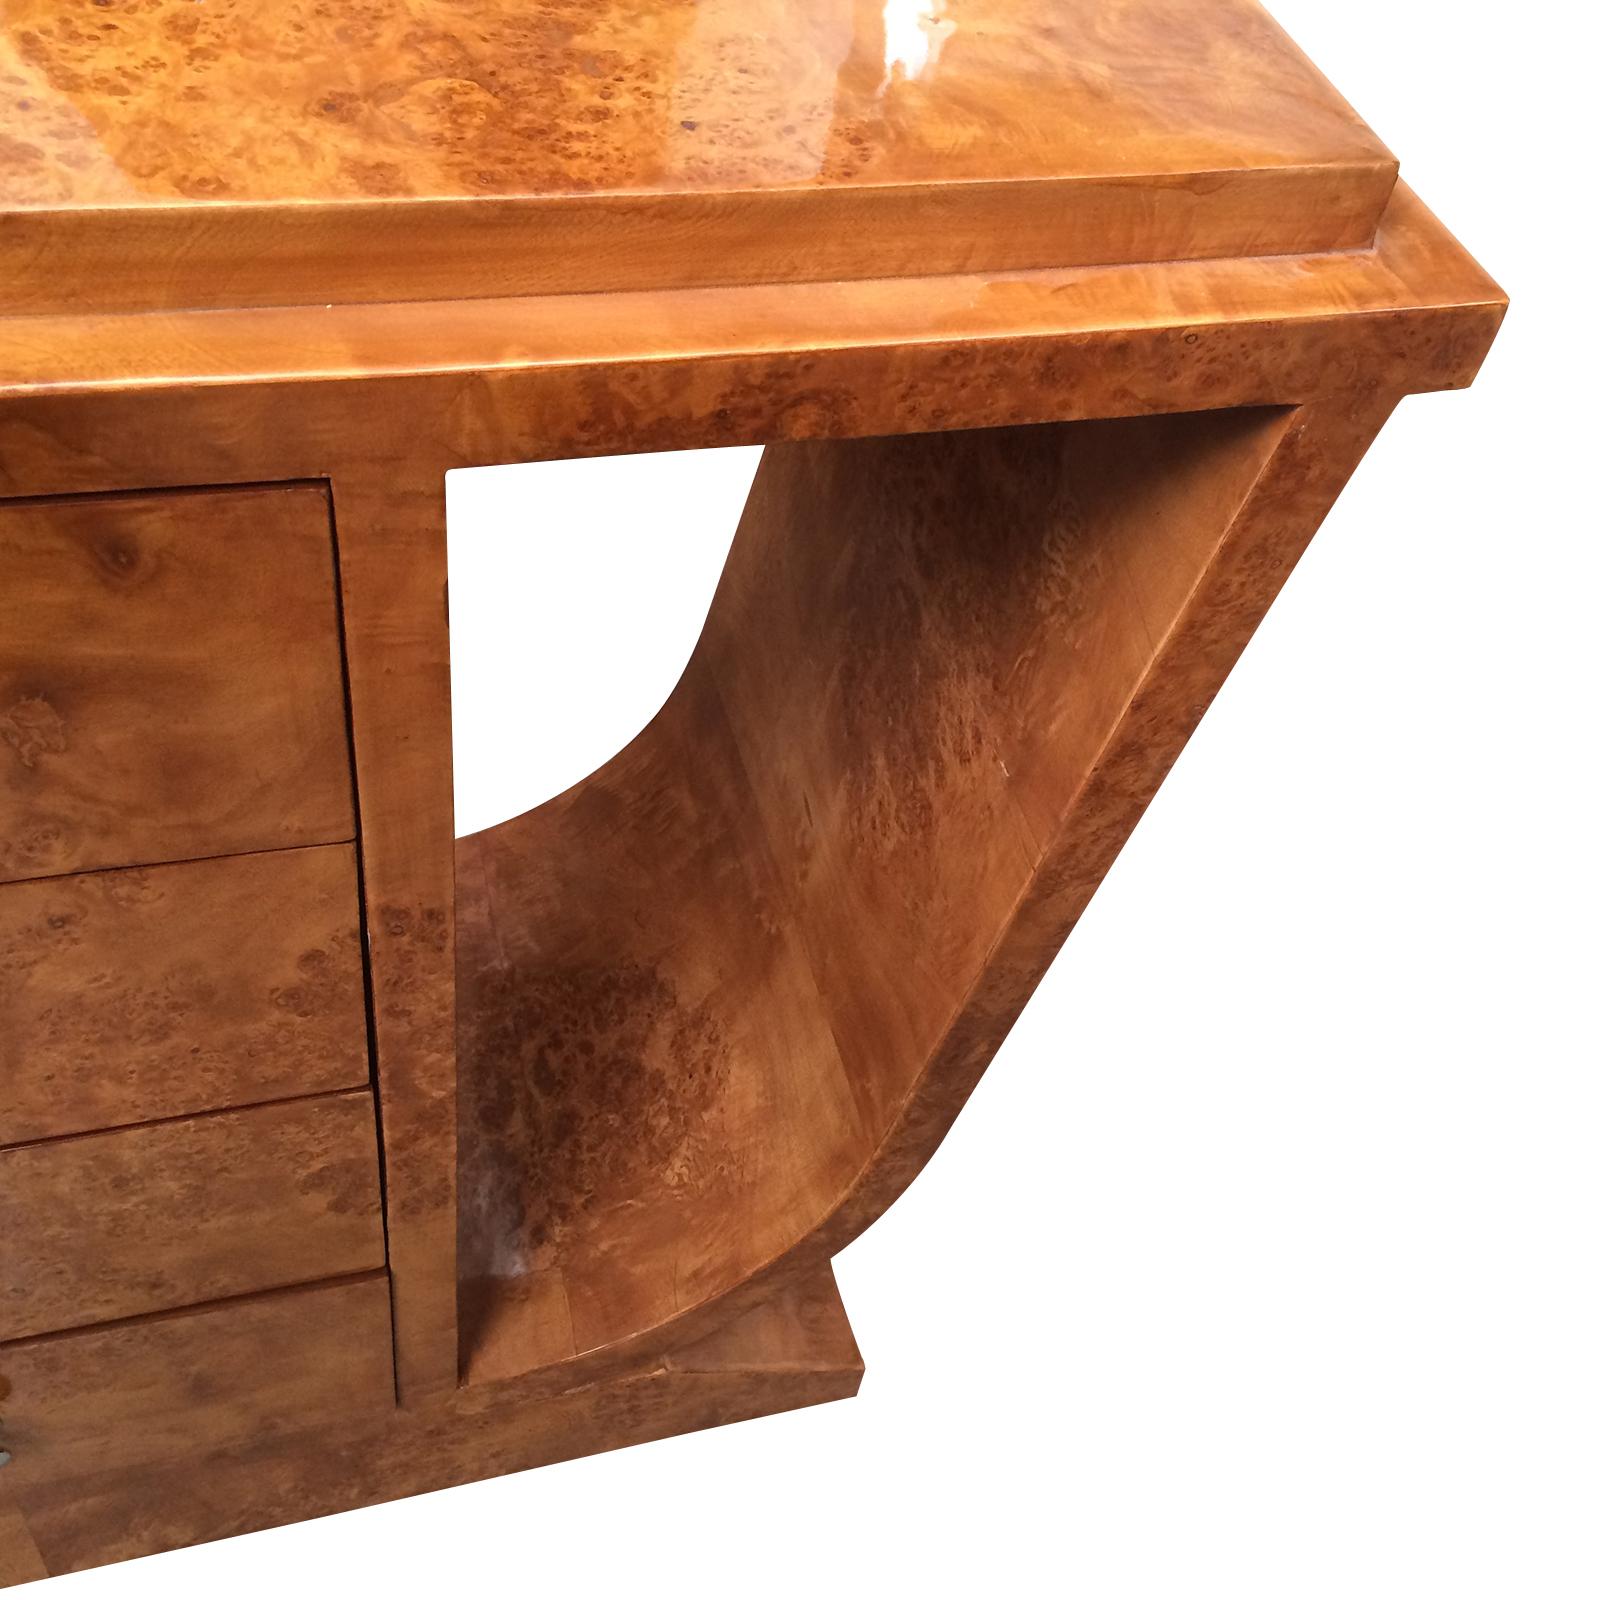 Art Deco design console table in burl Amboyna wood with 4 drawers to a central column in rectangular form. The top has also a large stepped edge to the front and the 2 sides. The 4 drawers, each with a central, mushroom shaped nickel handle. The